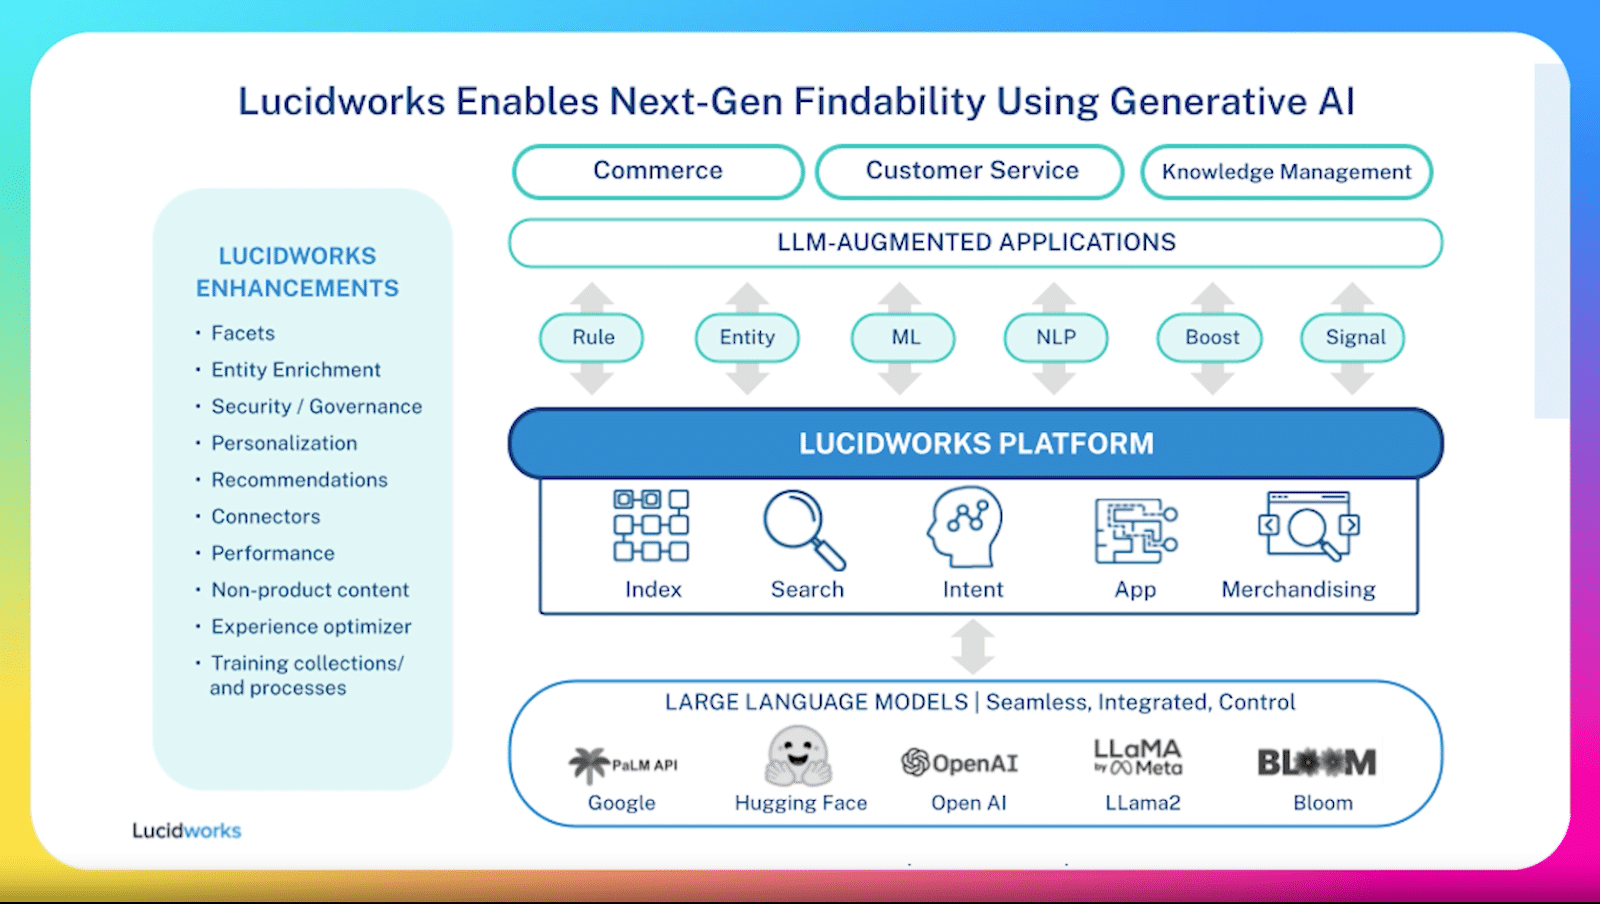 This Lucidworks architecture diagram illustrates how the Lucidworks platform integrates with Large Language Models (LLMs) to enhance findability in commerce, customer service, and knowledge management applications.